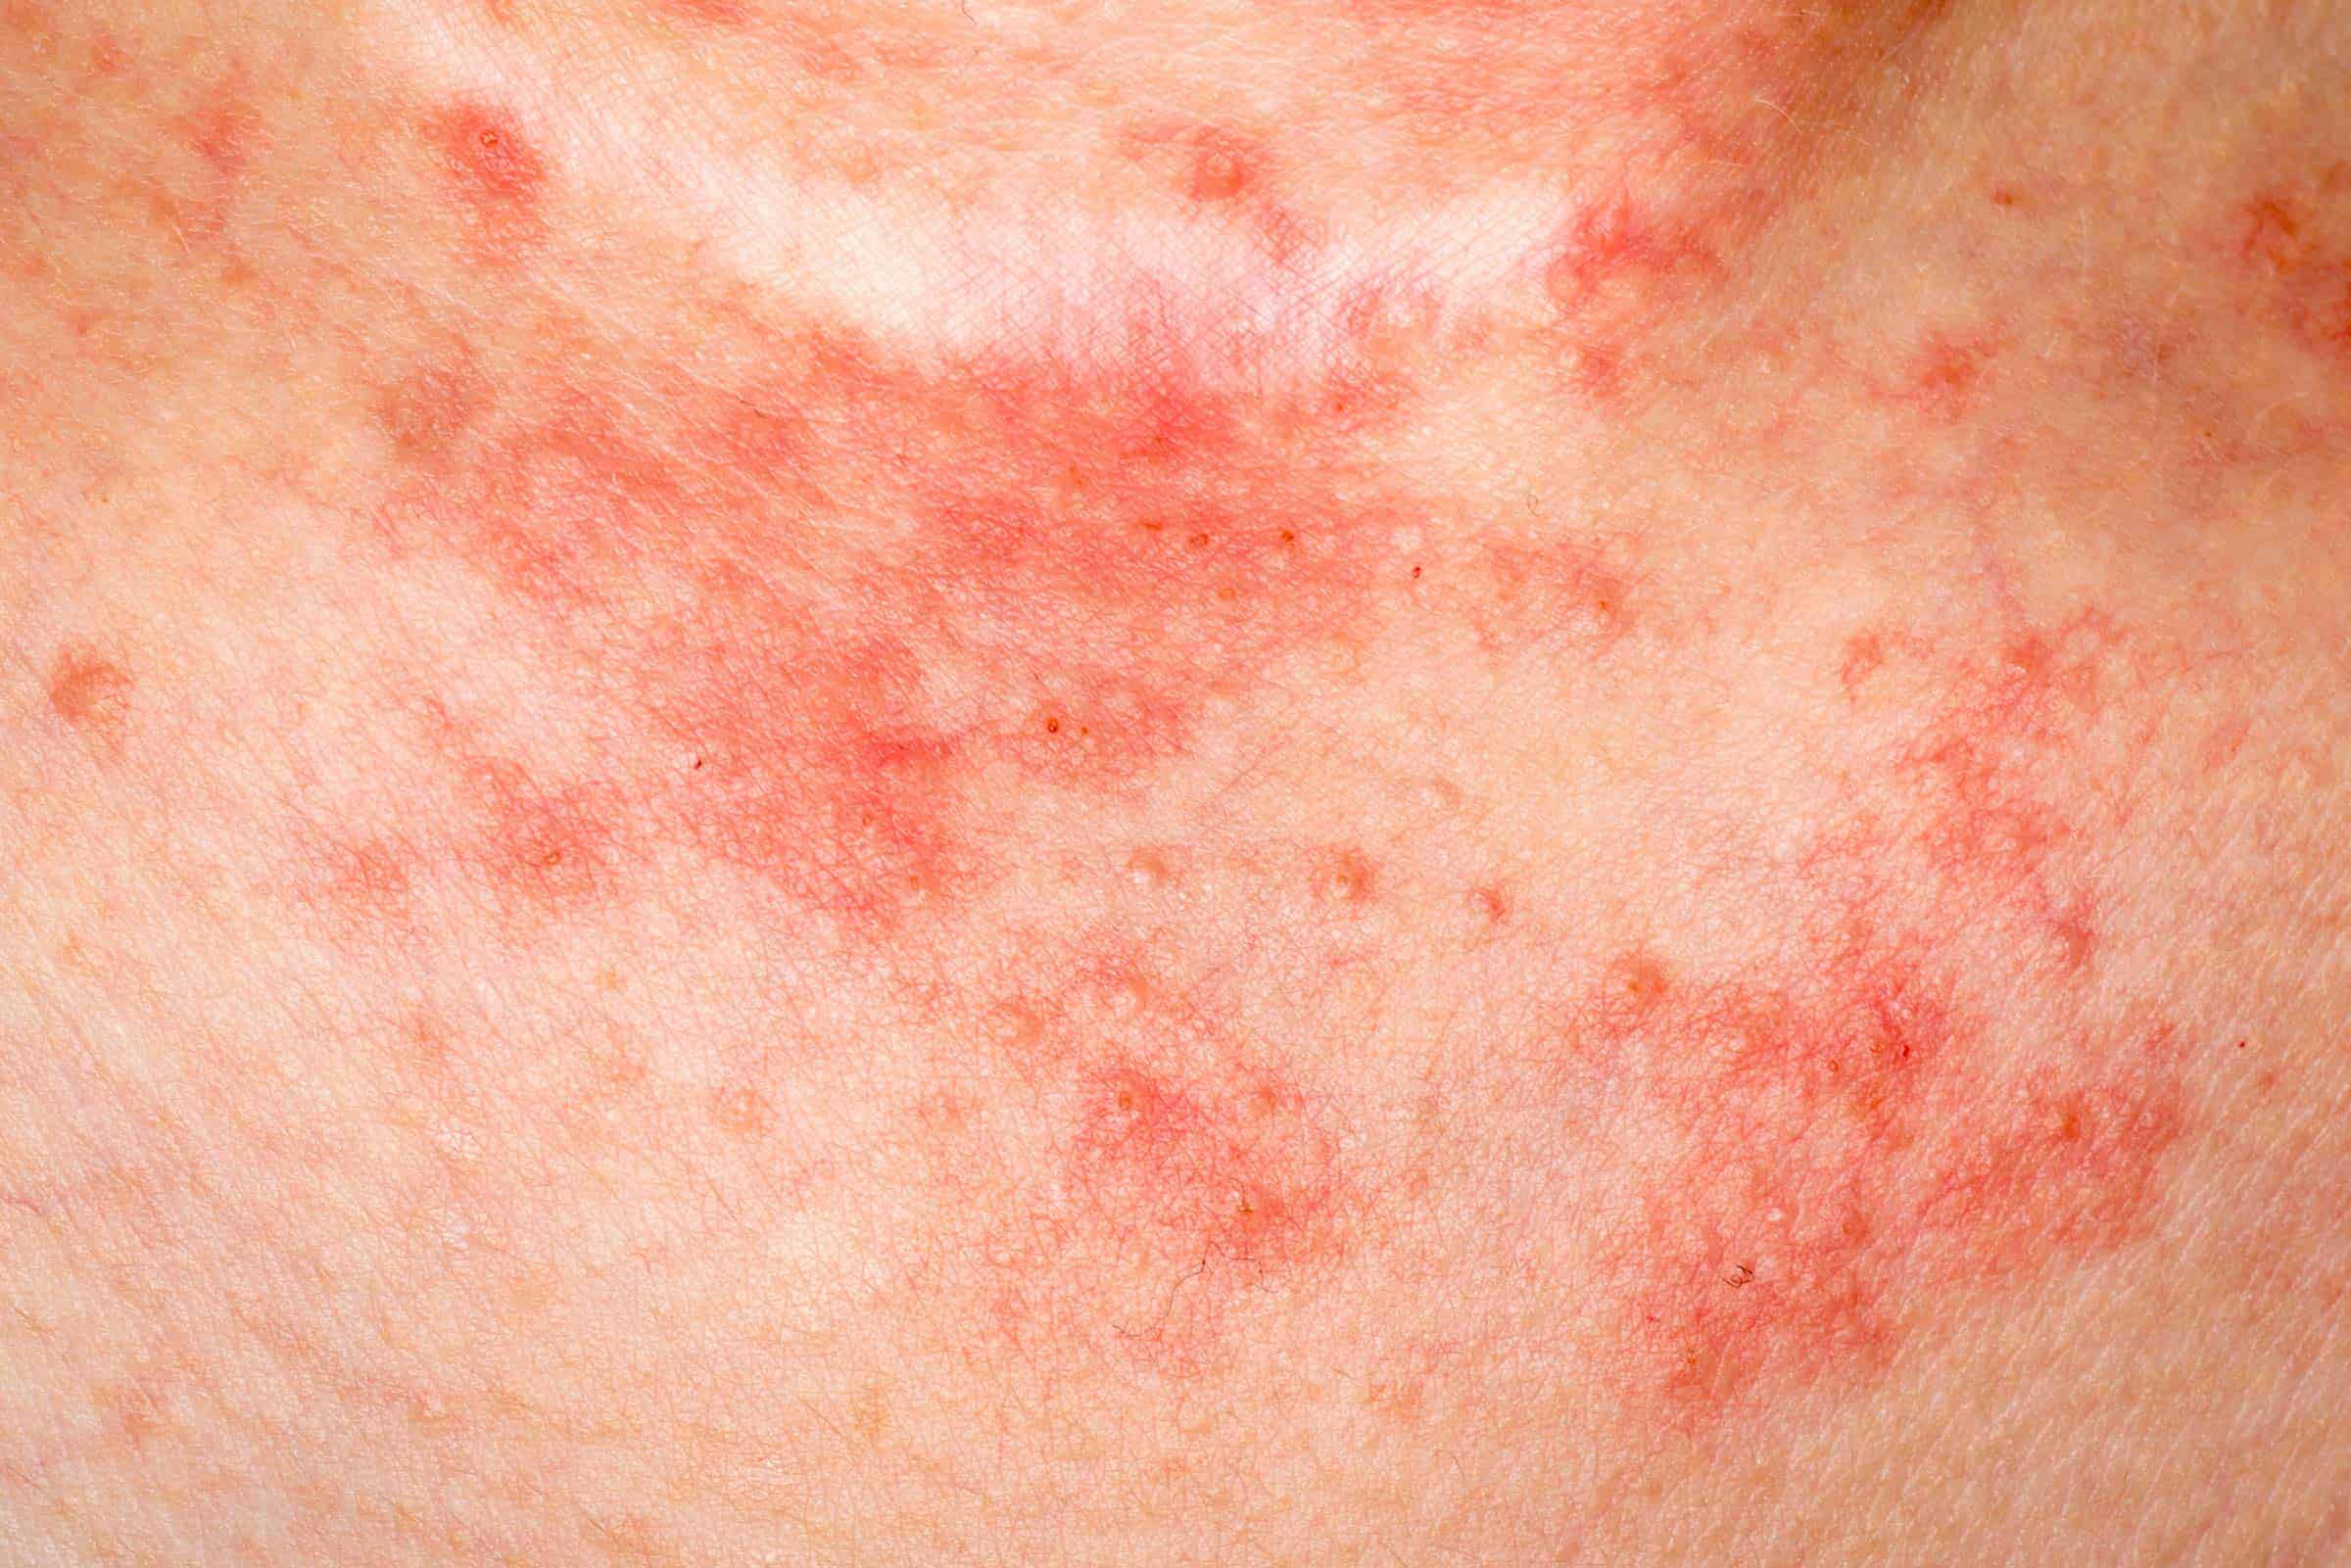 Eczema vs Psoriasis: What You Should Know